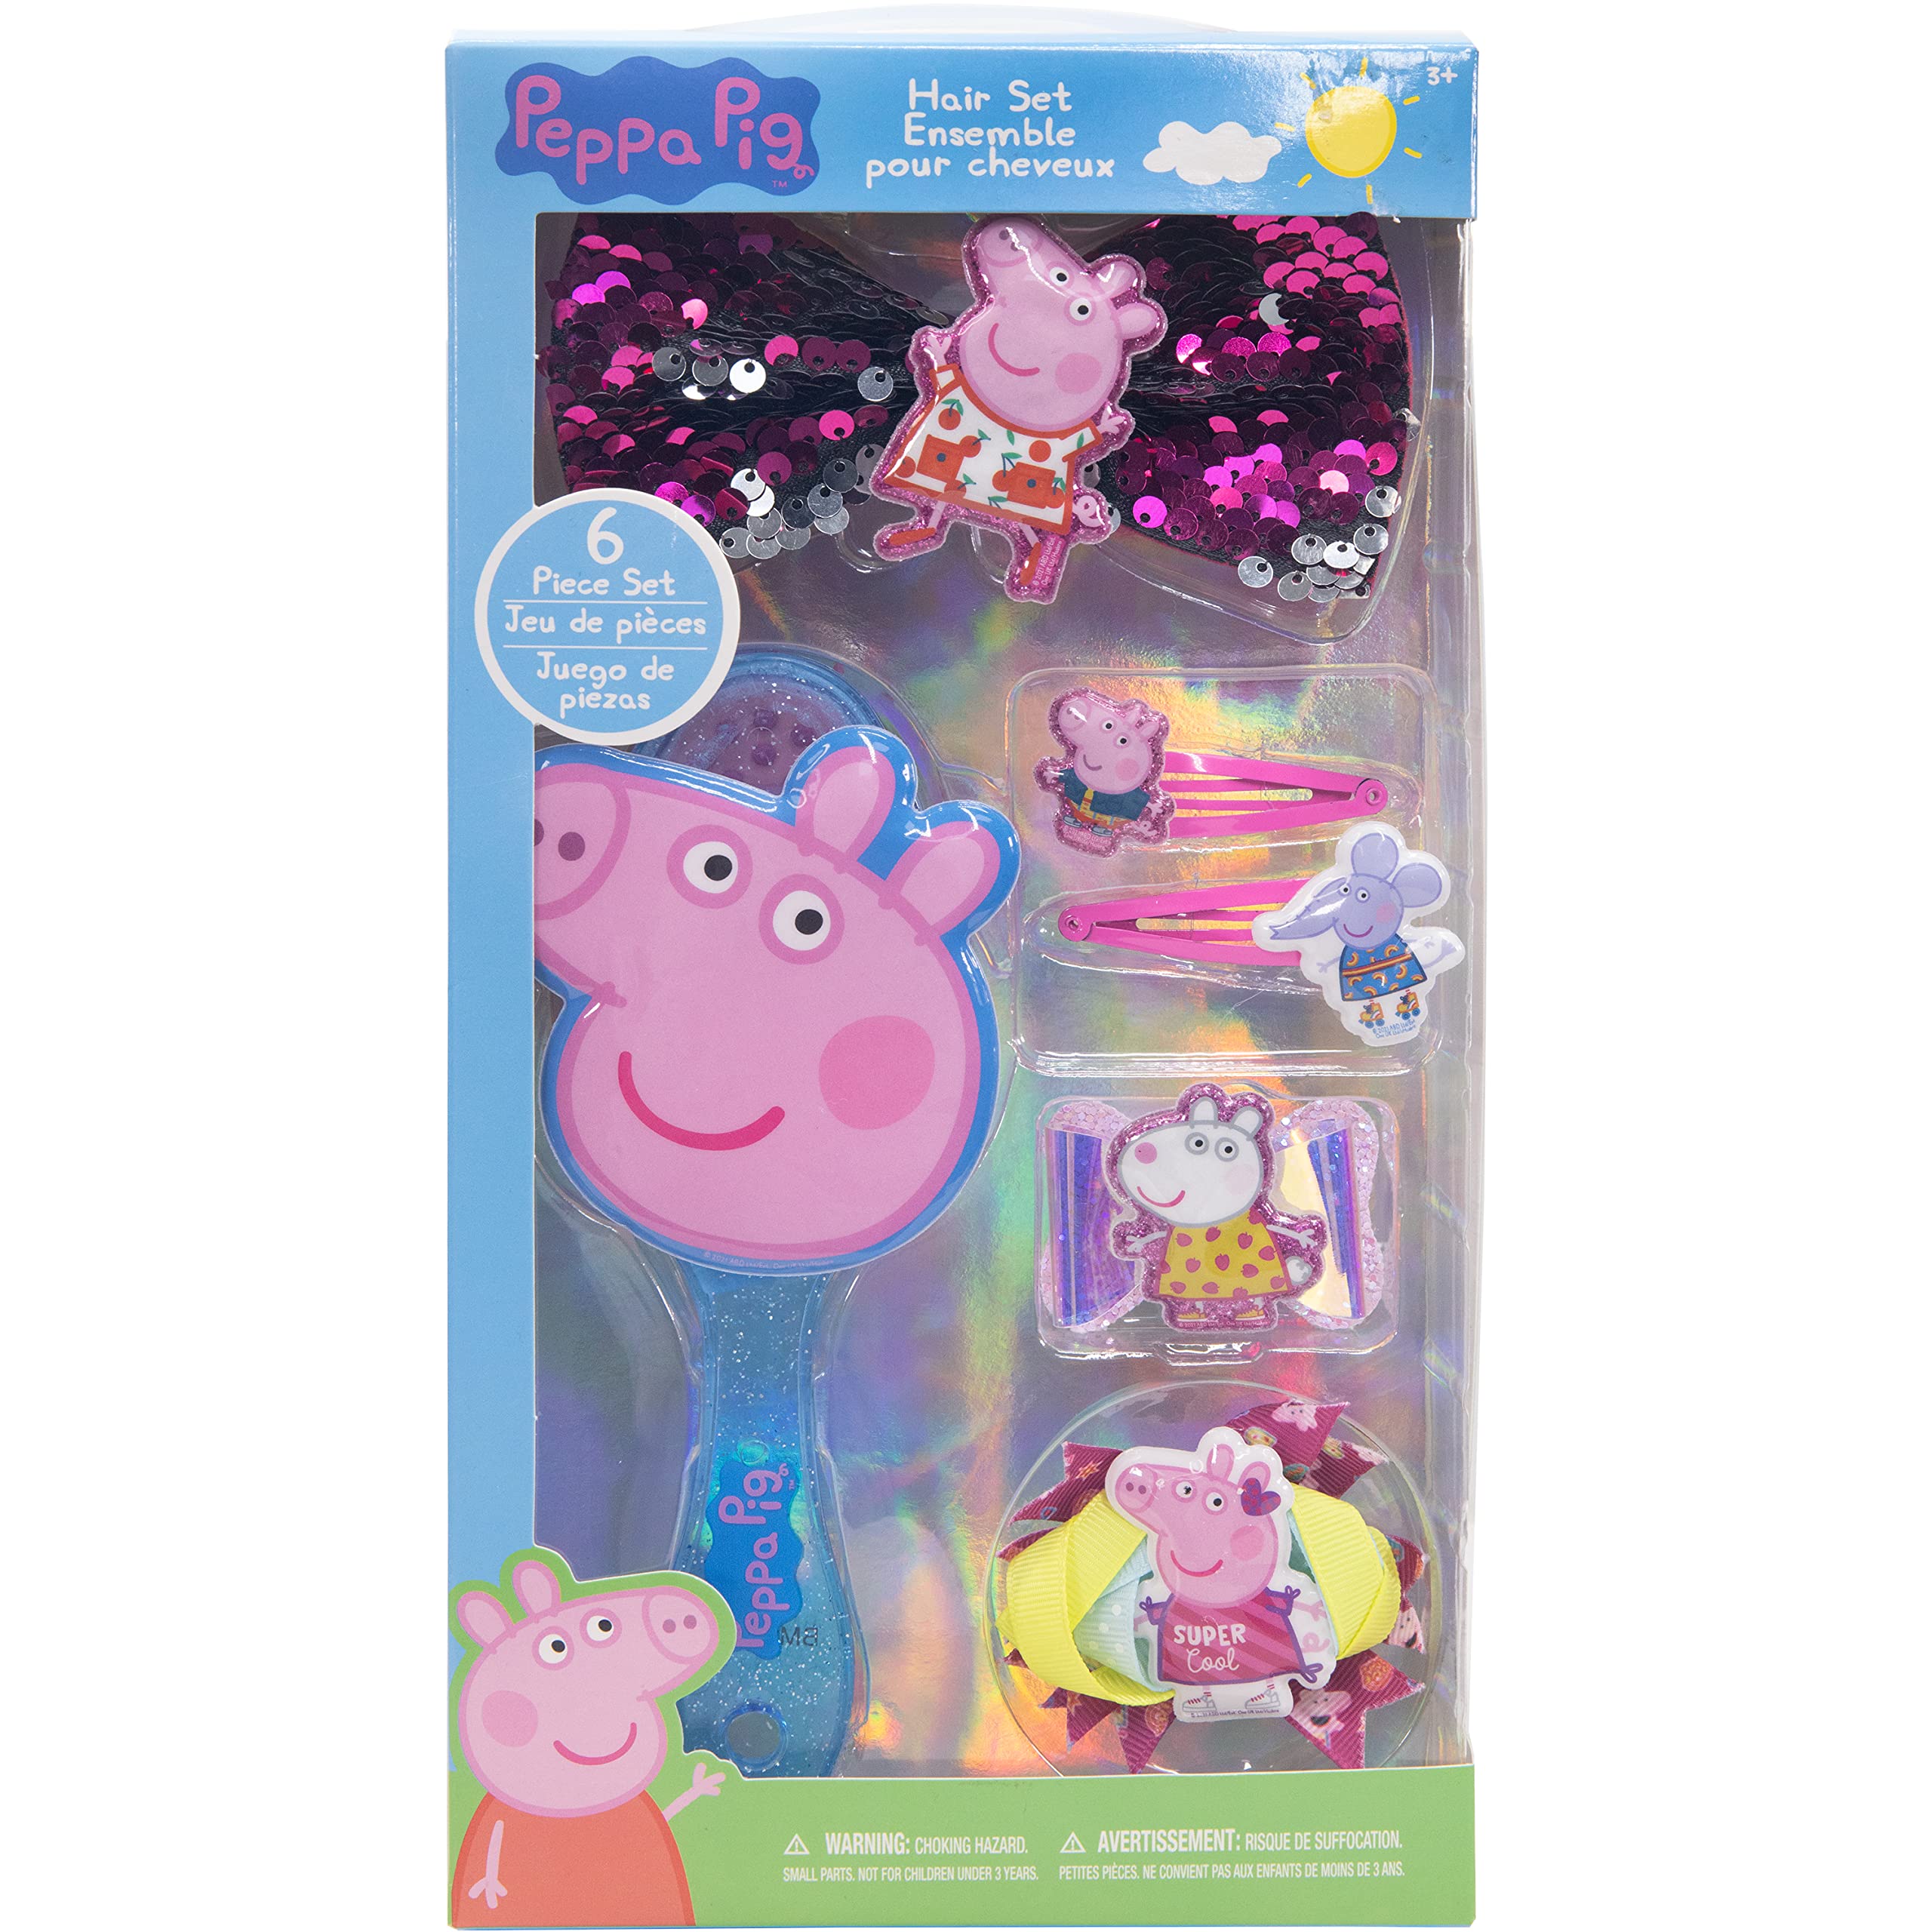 Fangoso Tranquilidad de espíritu crédito Peppa Pig - Townley Girl Hair Accessories Box|Gift Set for Kids Girls|Ages  3+ (6 Pcs) Including Hair Bow, Hair Brush, Snap Clips and More, for  Parties, Sleepovers and Makeovers